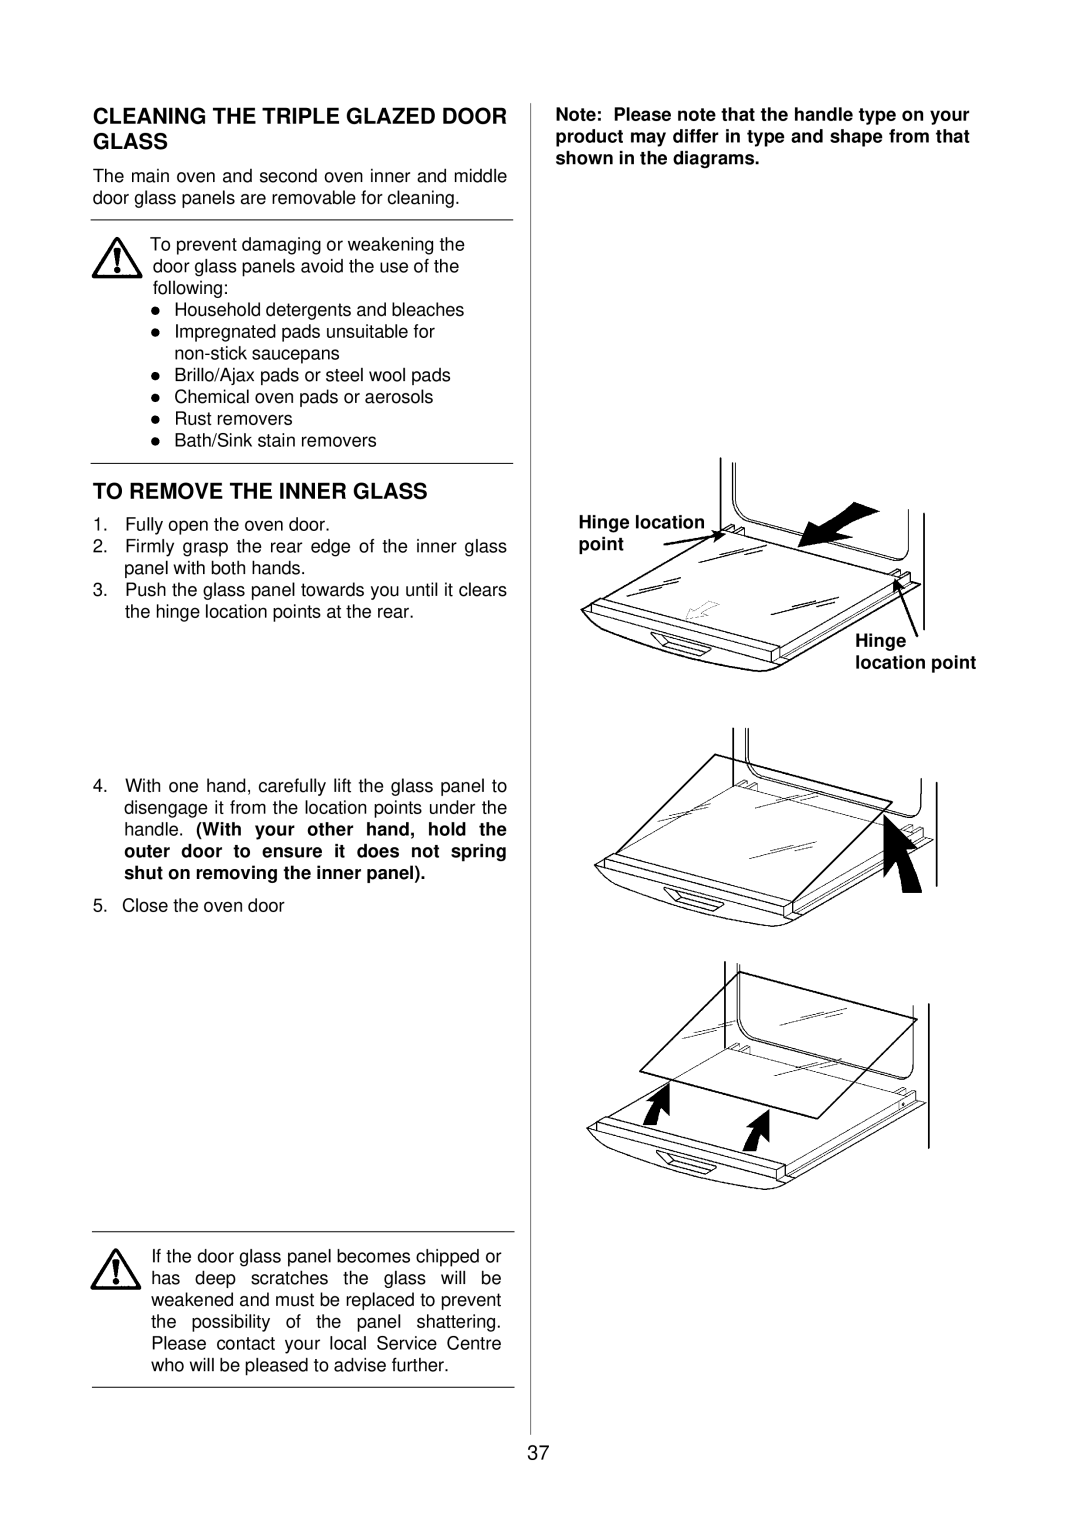 Electrolux D81005, D81000 installation instructions Cleaning the Triple Glazed Door Glass, To Remove the Inner Glass 